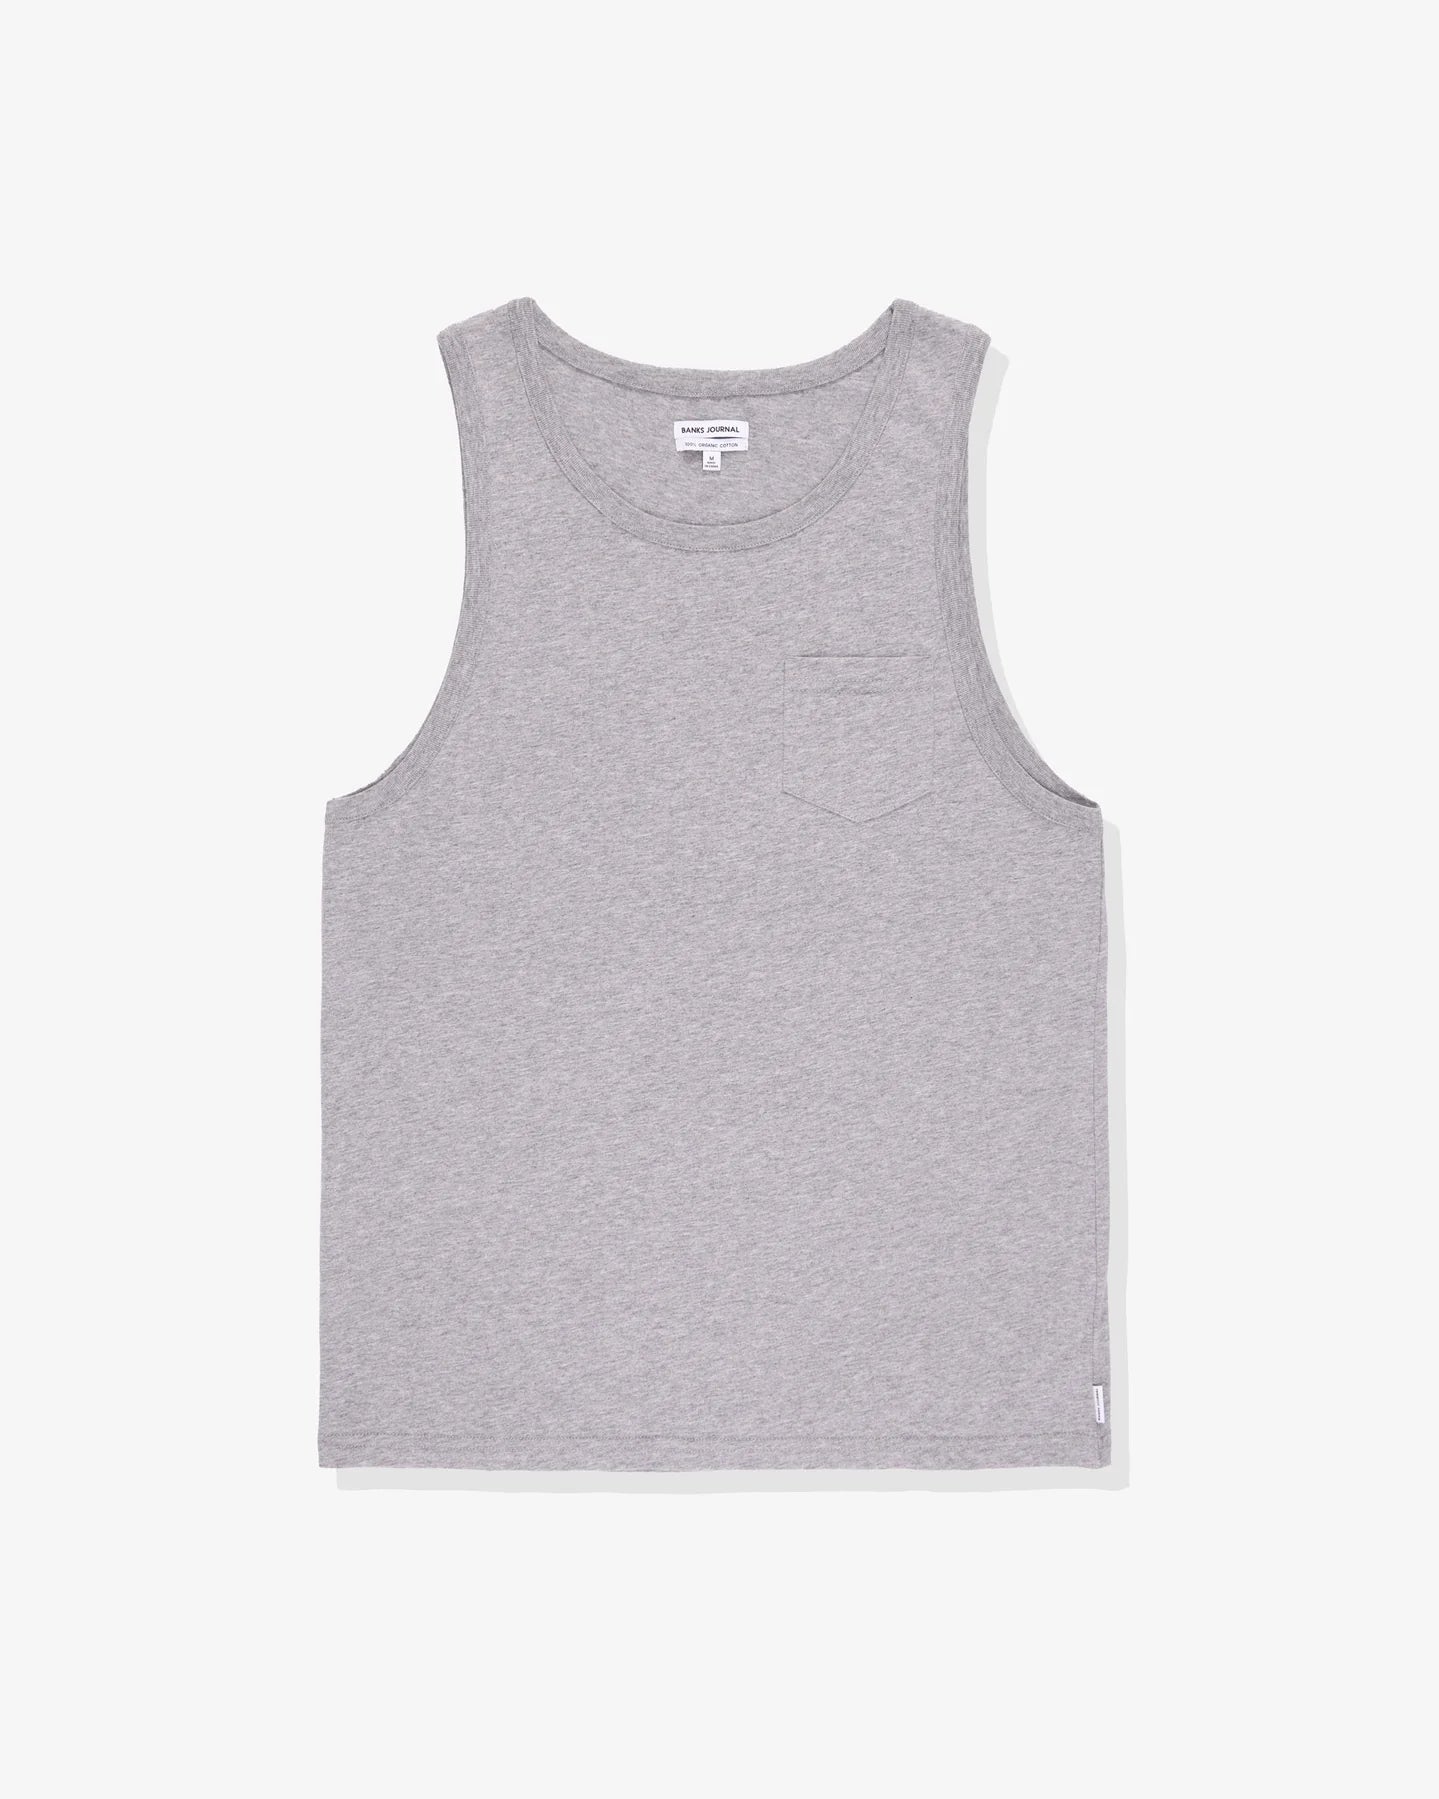 Primary Tank - Washed Grey